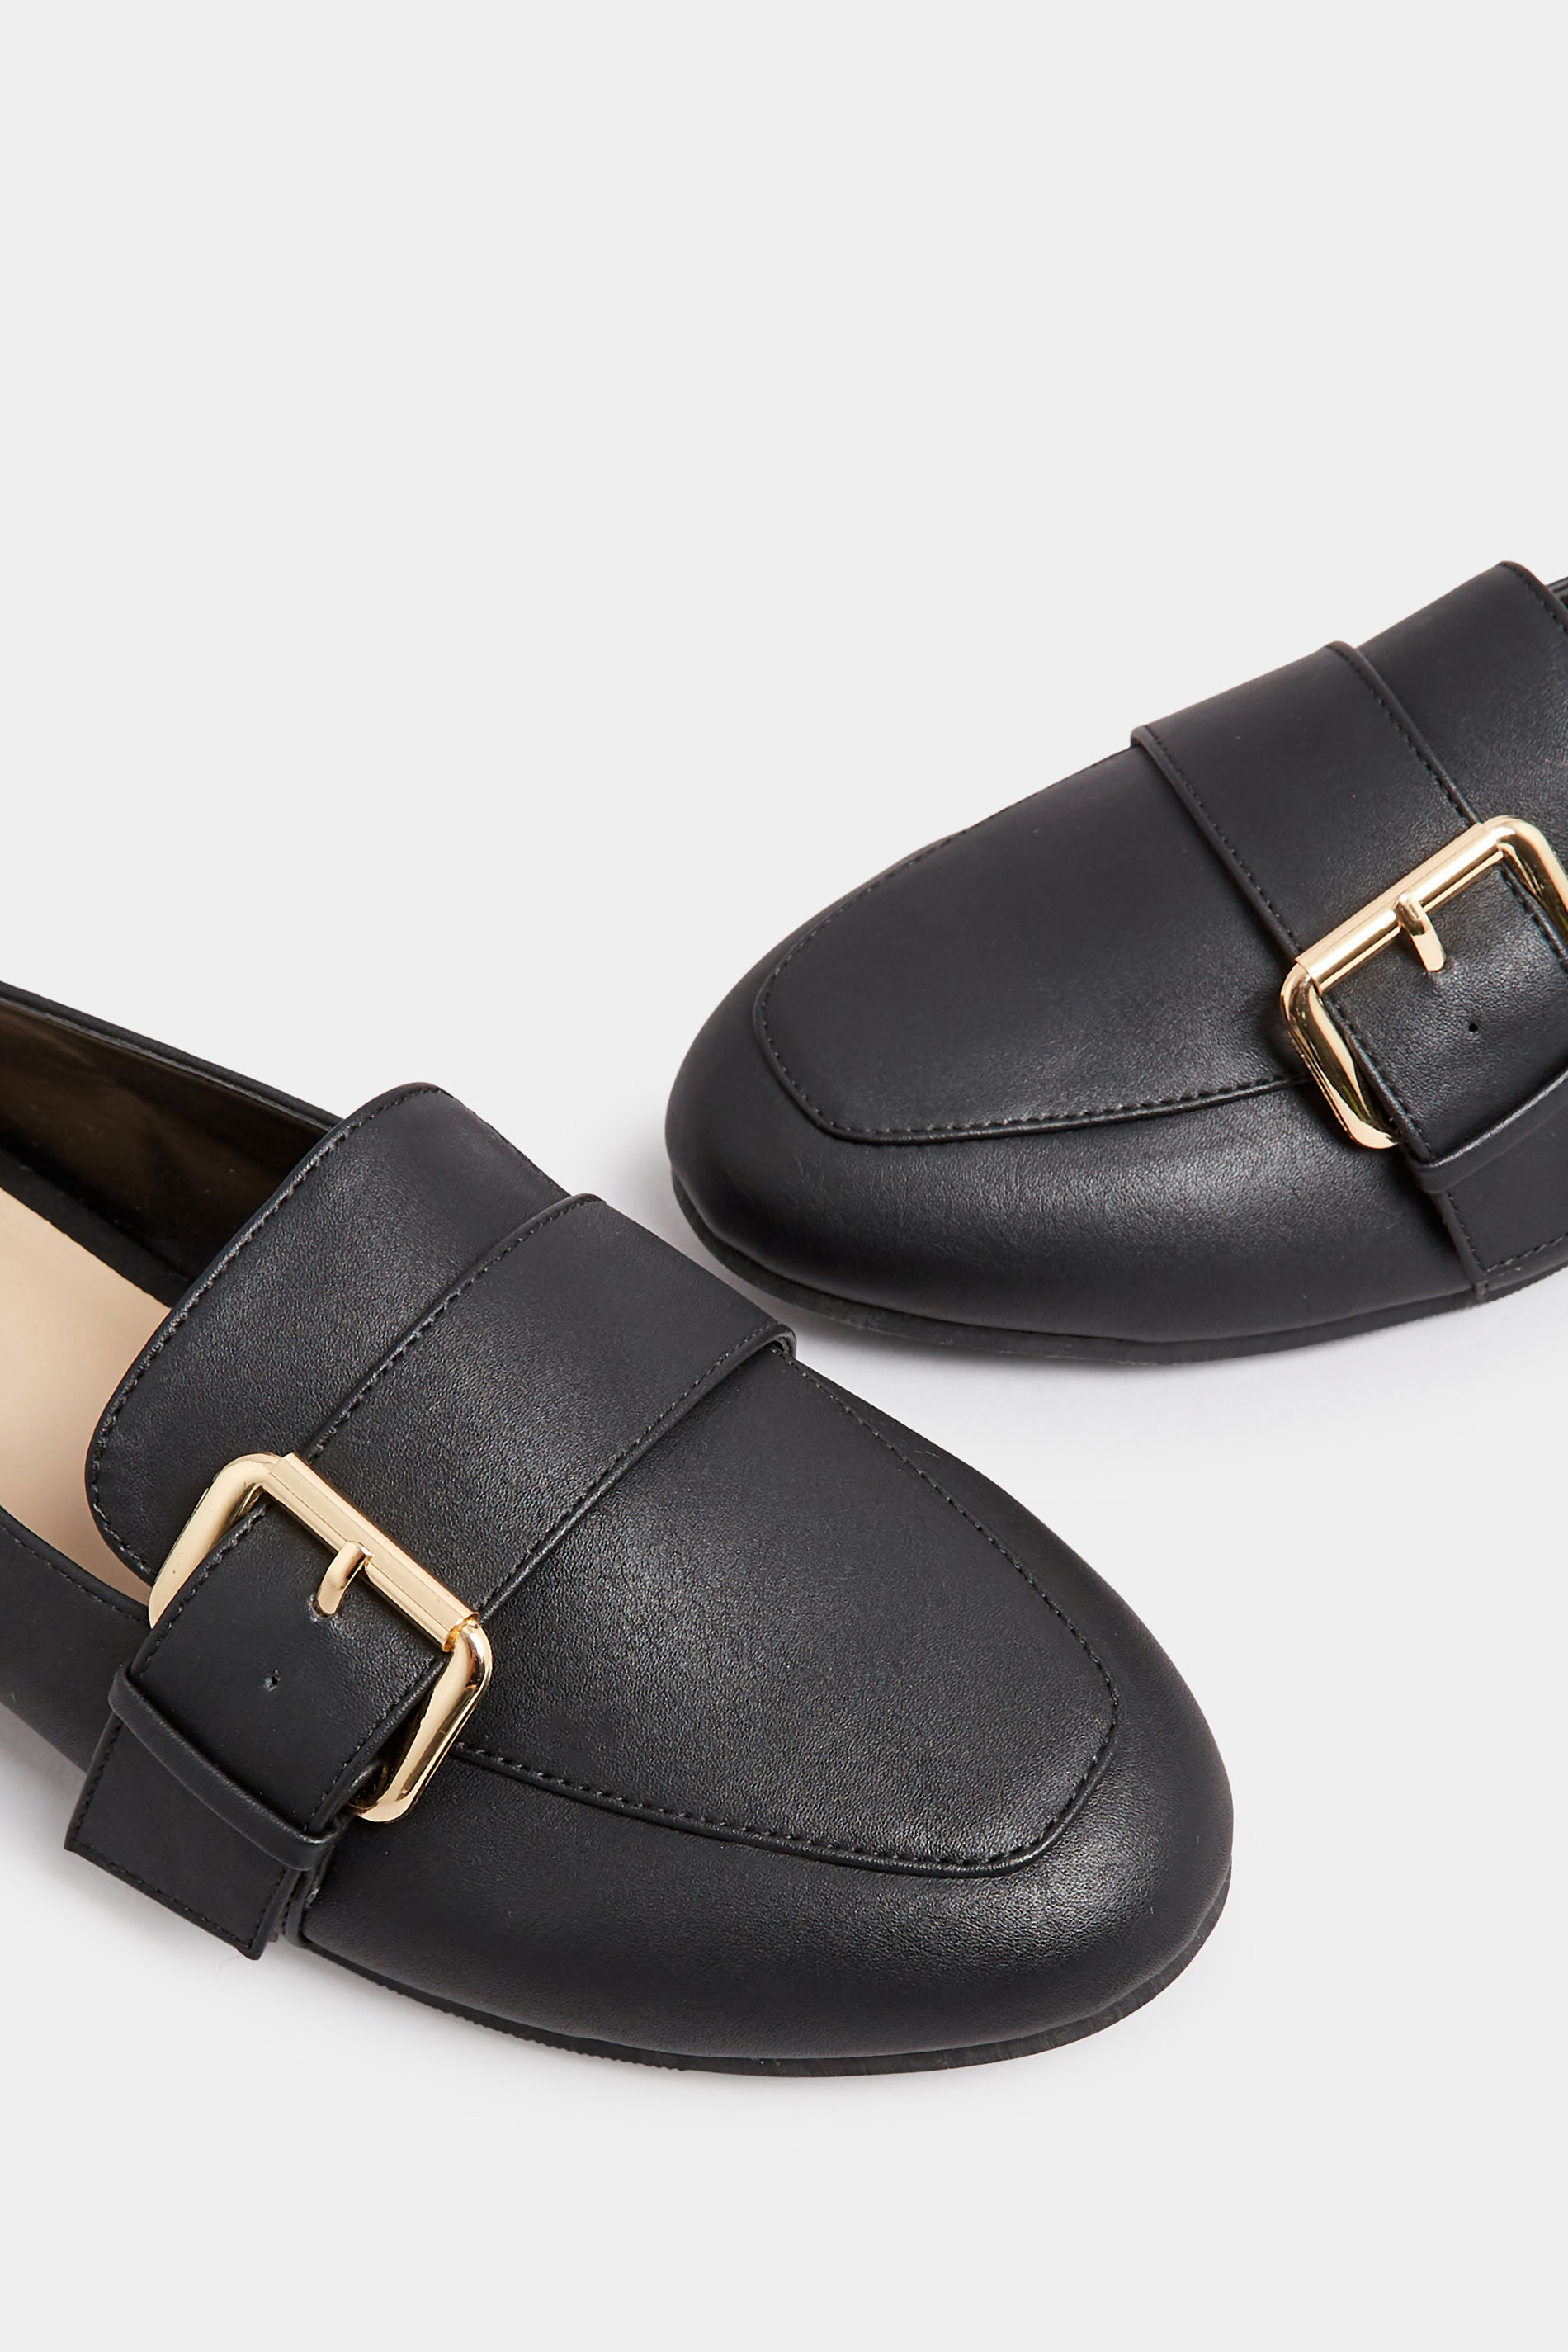 Black Buckle Faux Leather Loafers In Wide E Fit & Extra Wide EEE Fit ...